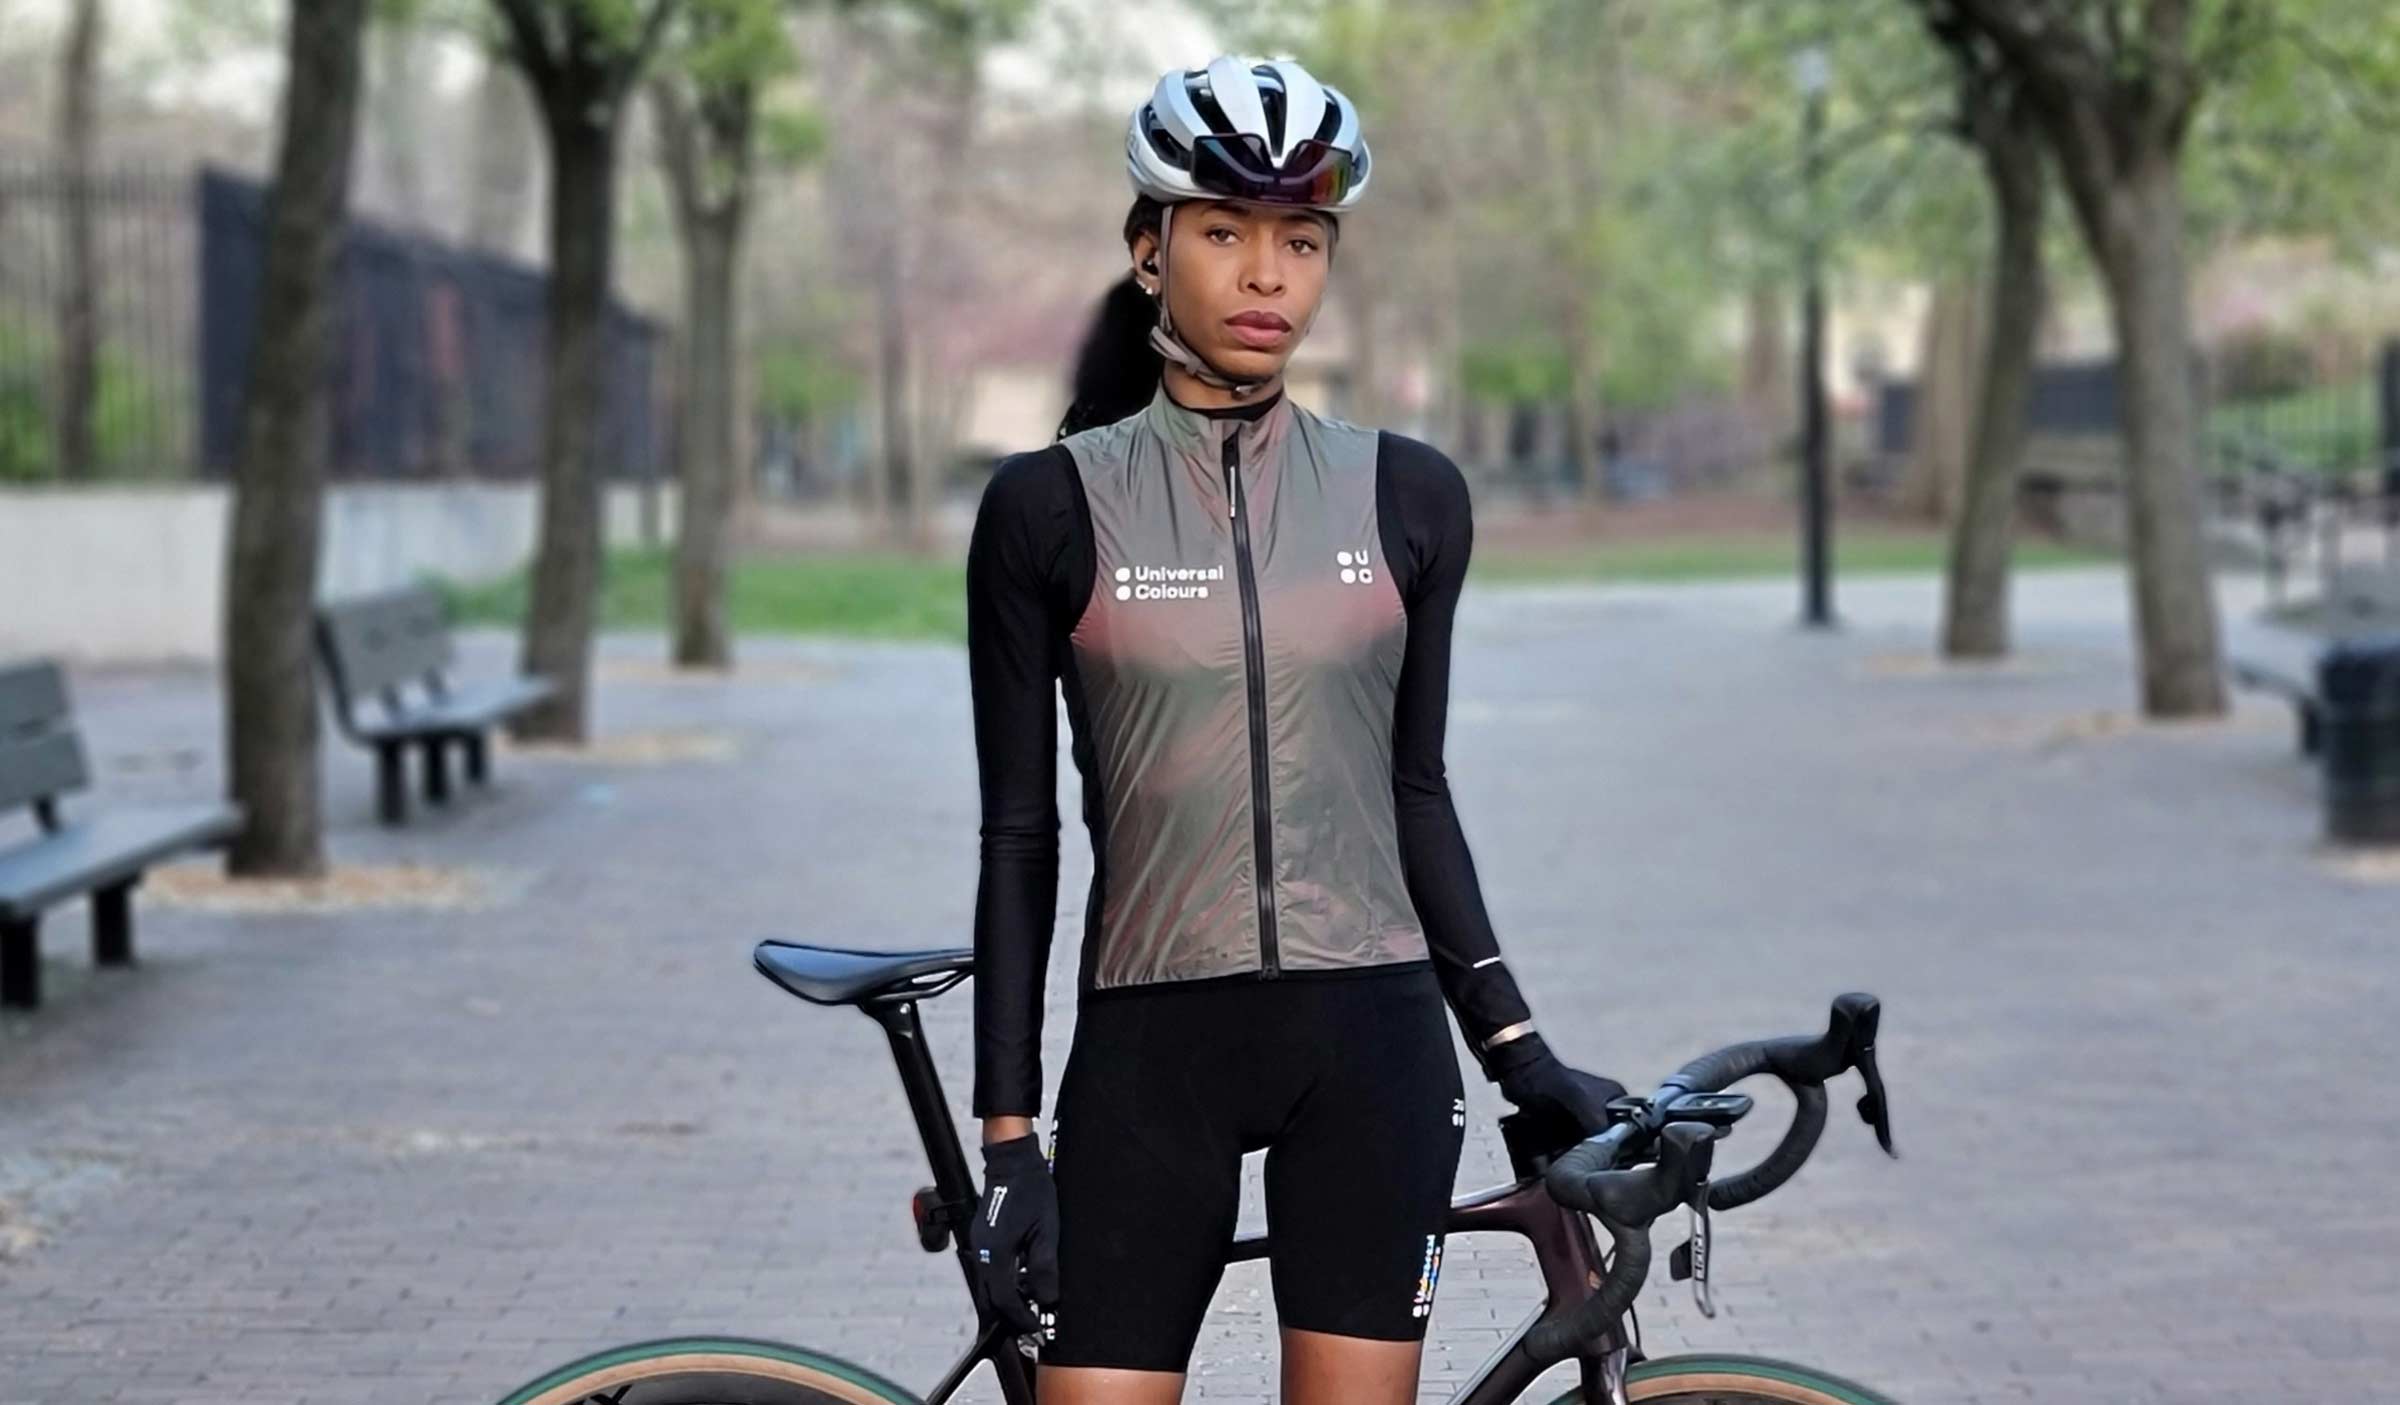 110 Best Cycling outfit ideas  cycling outfit, cycling wear